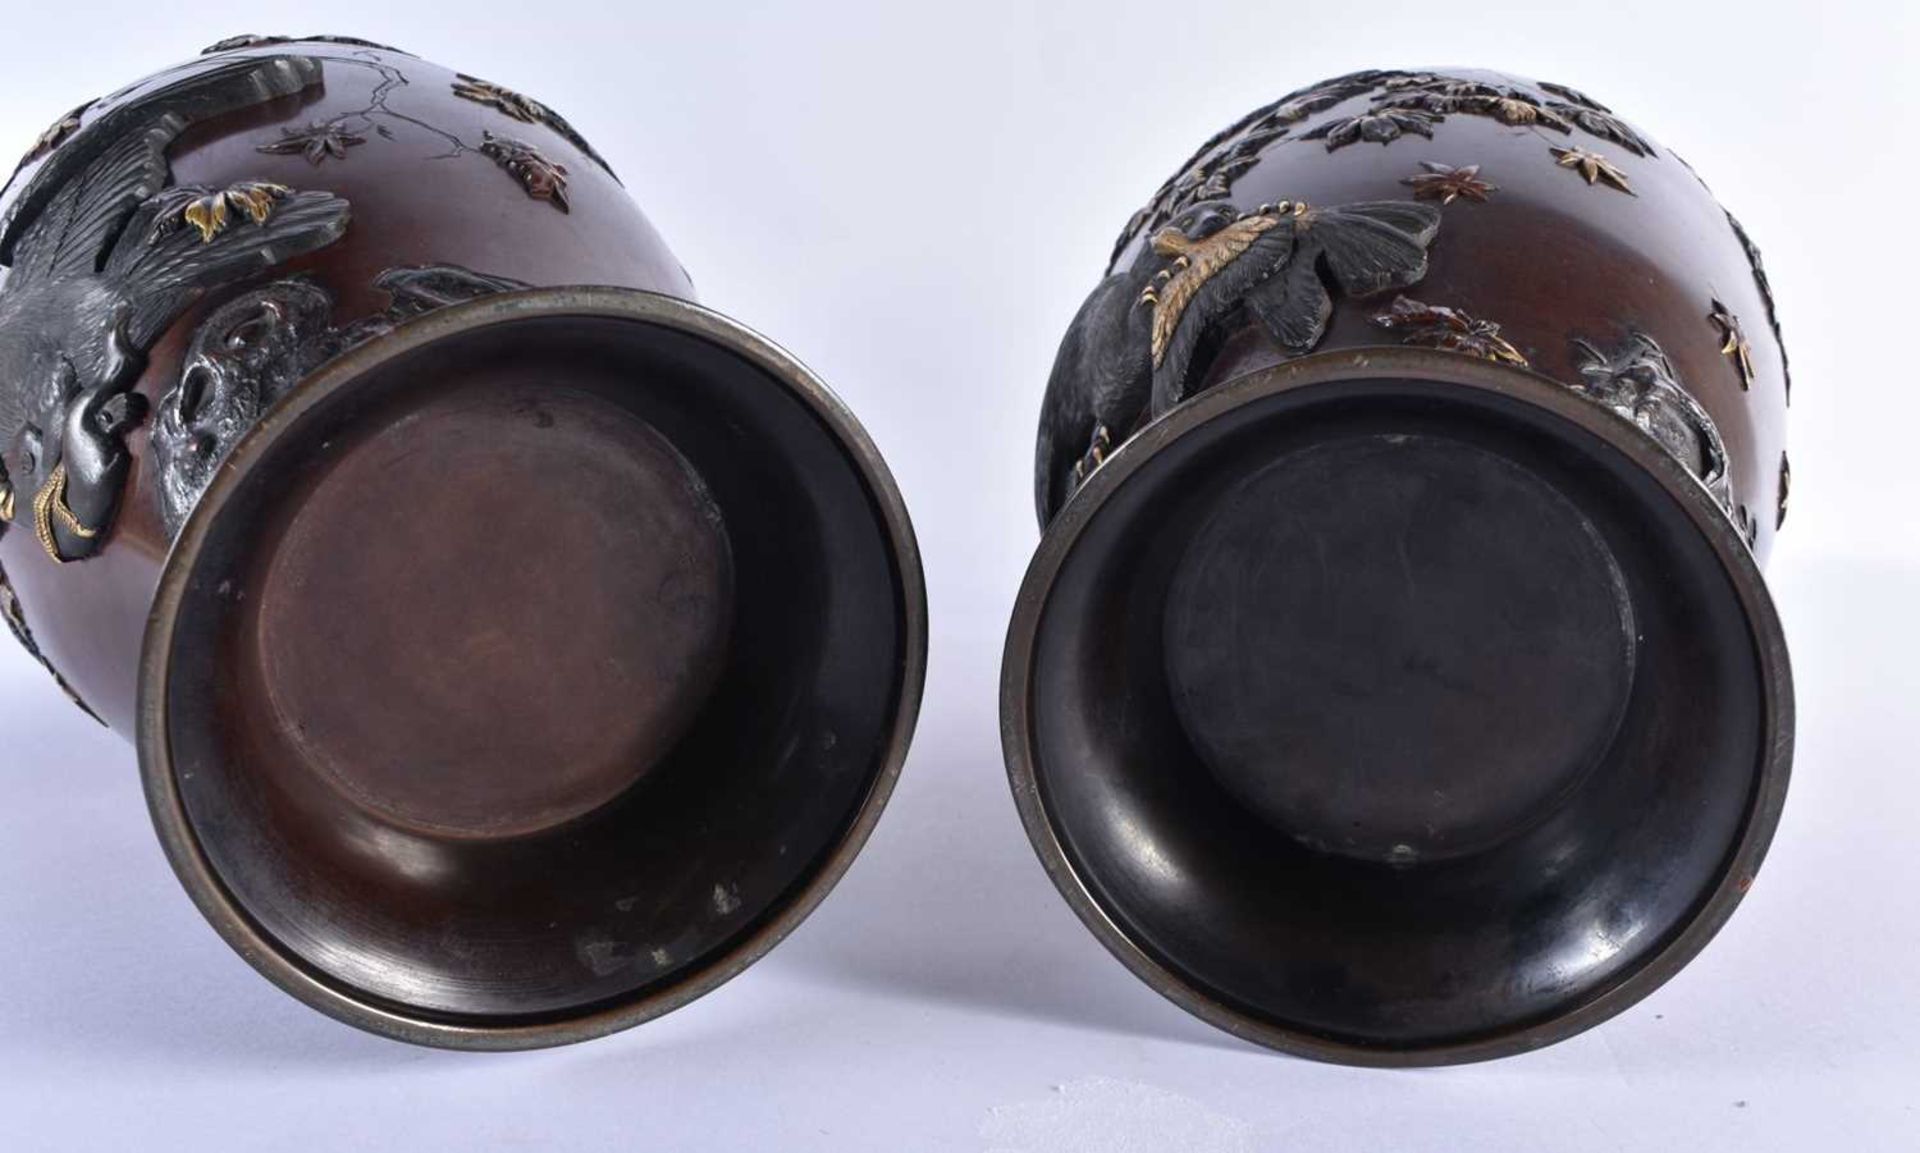 A VERY FINE PAIR OF 19TH CENTURY JAPANESE MEIJI PERIOD GOLD ONLAID BRONZE VASES Attributed to Suzuki - Image 11 of 11